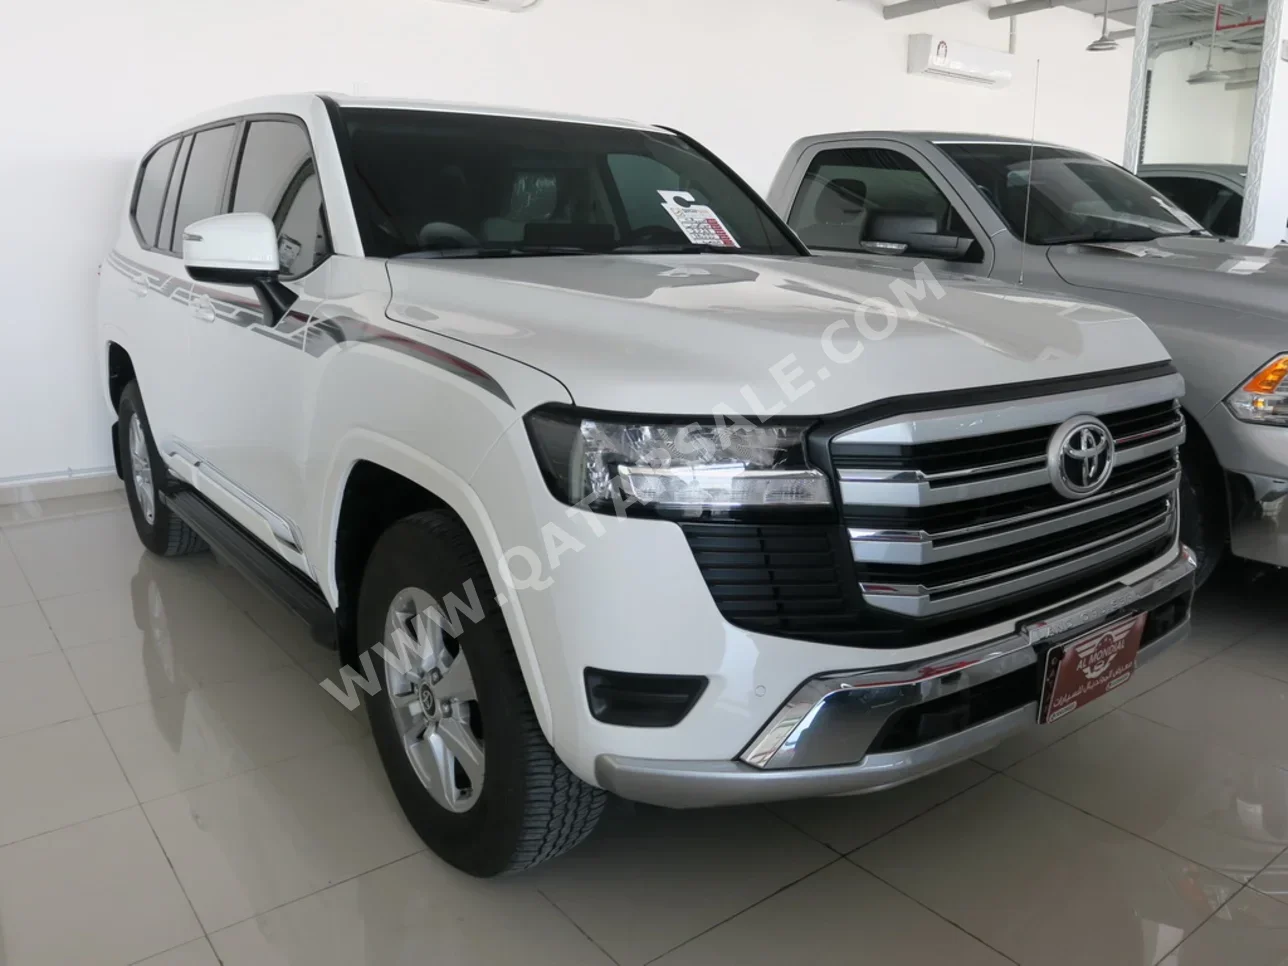 Toyota  Land Cruiser  GXR  2023  Automatic  14,000 Km  6 Cylinder  Four Wheel Drive (4WD)  SUV  White  With Warranty